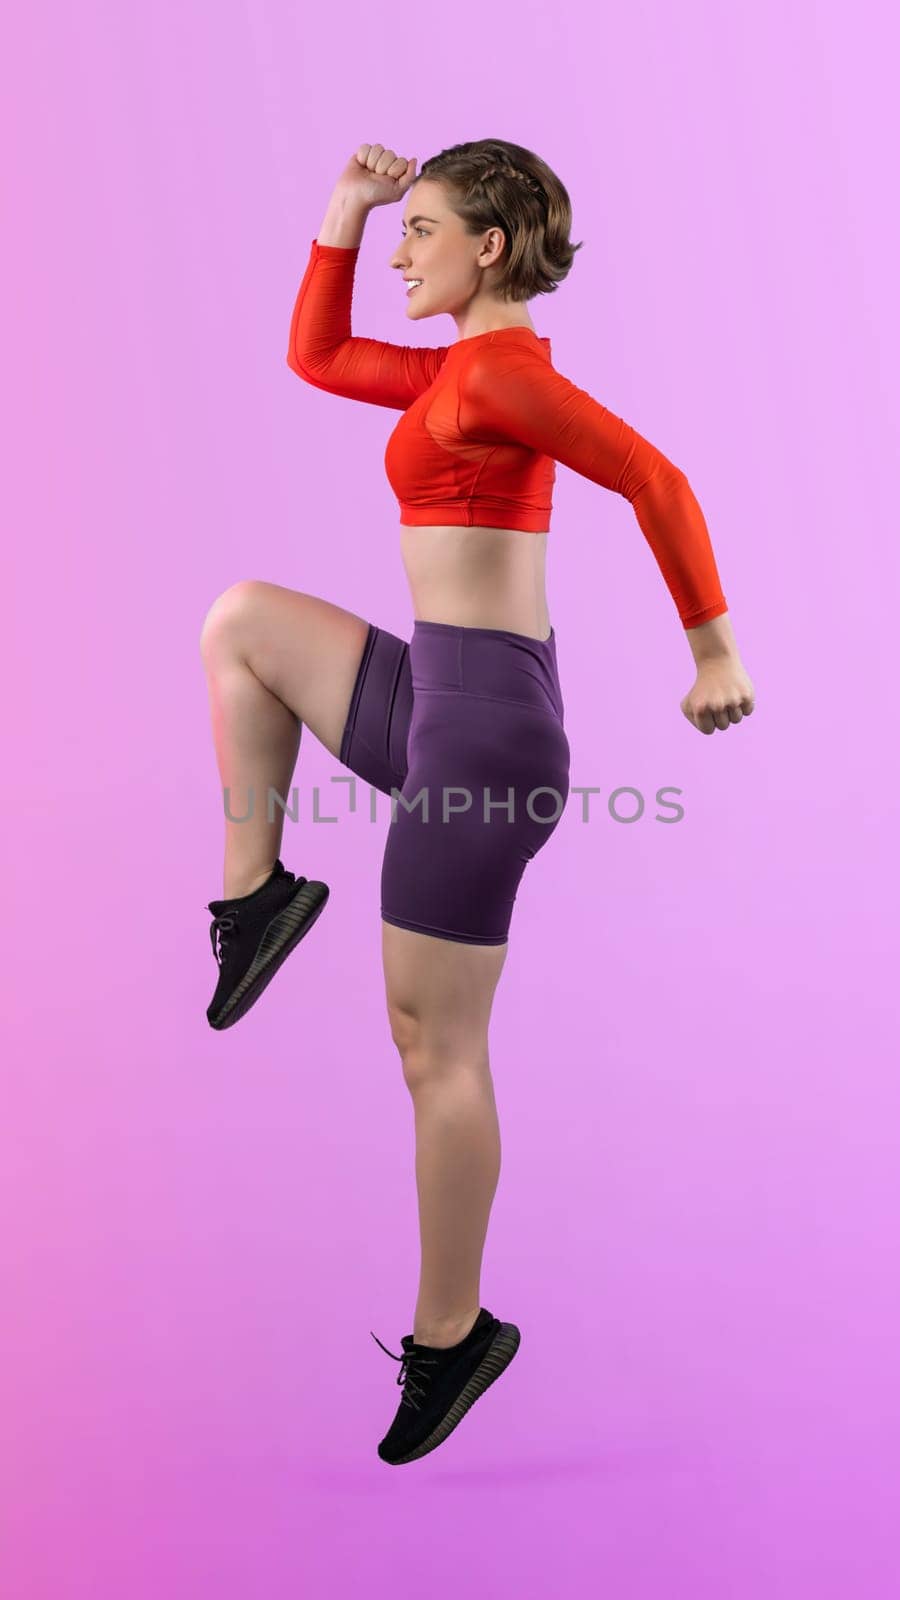 Full body length gaiety shot athletic and sporty young woman fitness running cardio exercise posture on isolated background. Healthy active and body care lifestyle.